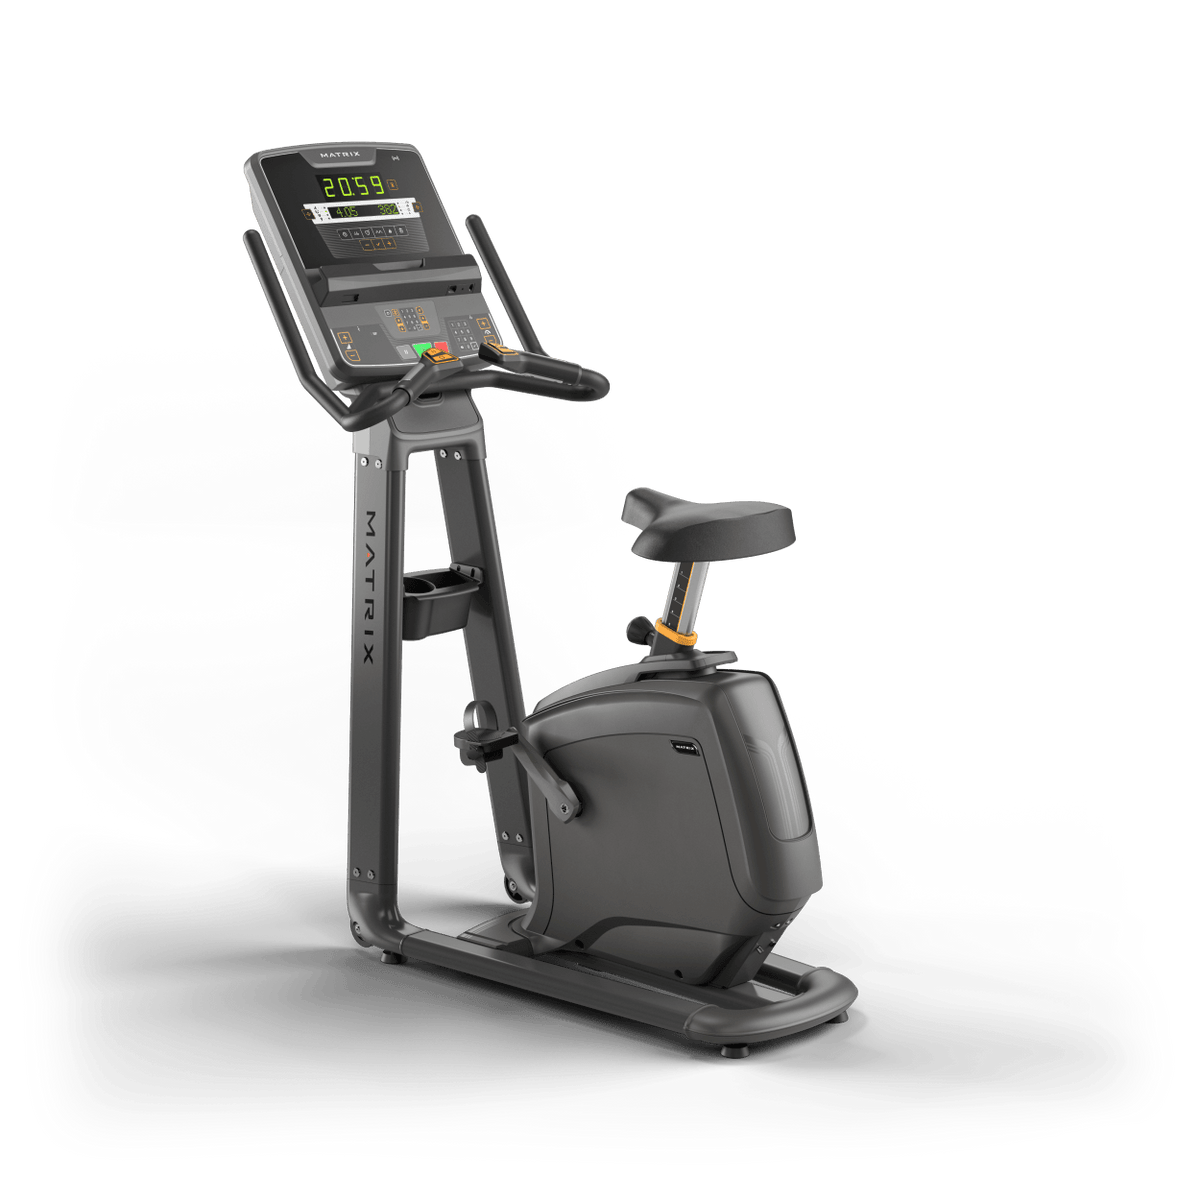 Matrix Fitness Lifestyle Upright with LED Console full view | Fitness Experience